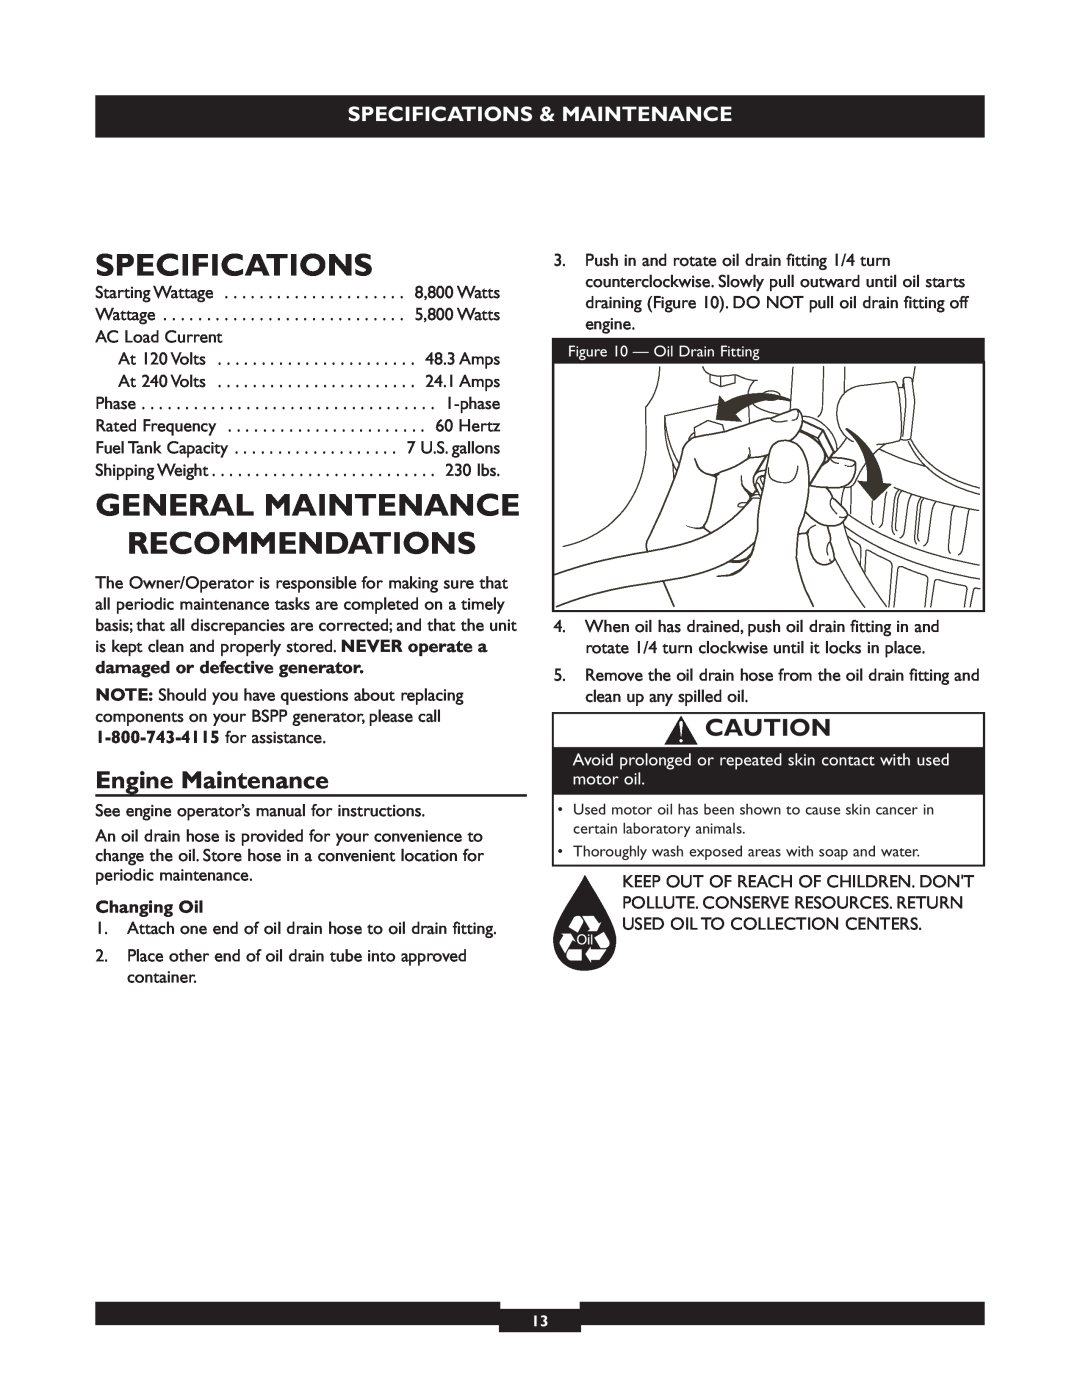 Briggs & Stratton 30205 manual Specifications, General Maintenance Recommendations, Engine Maintenance, Changing Oil 